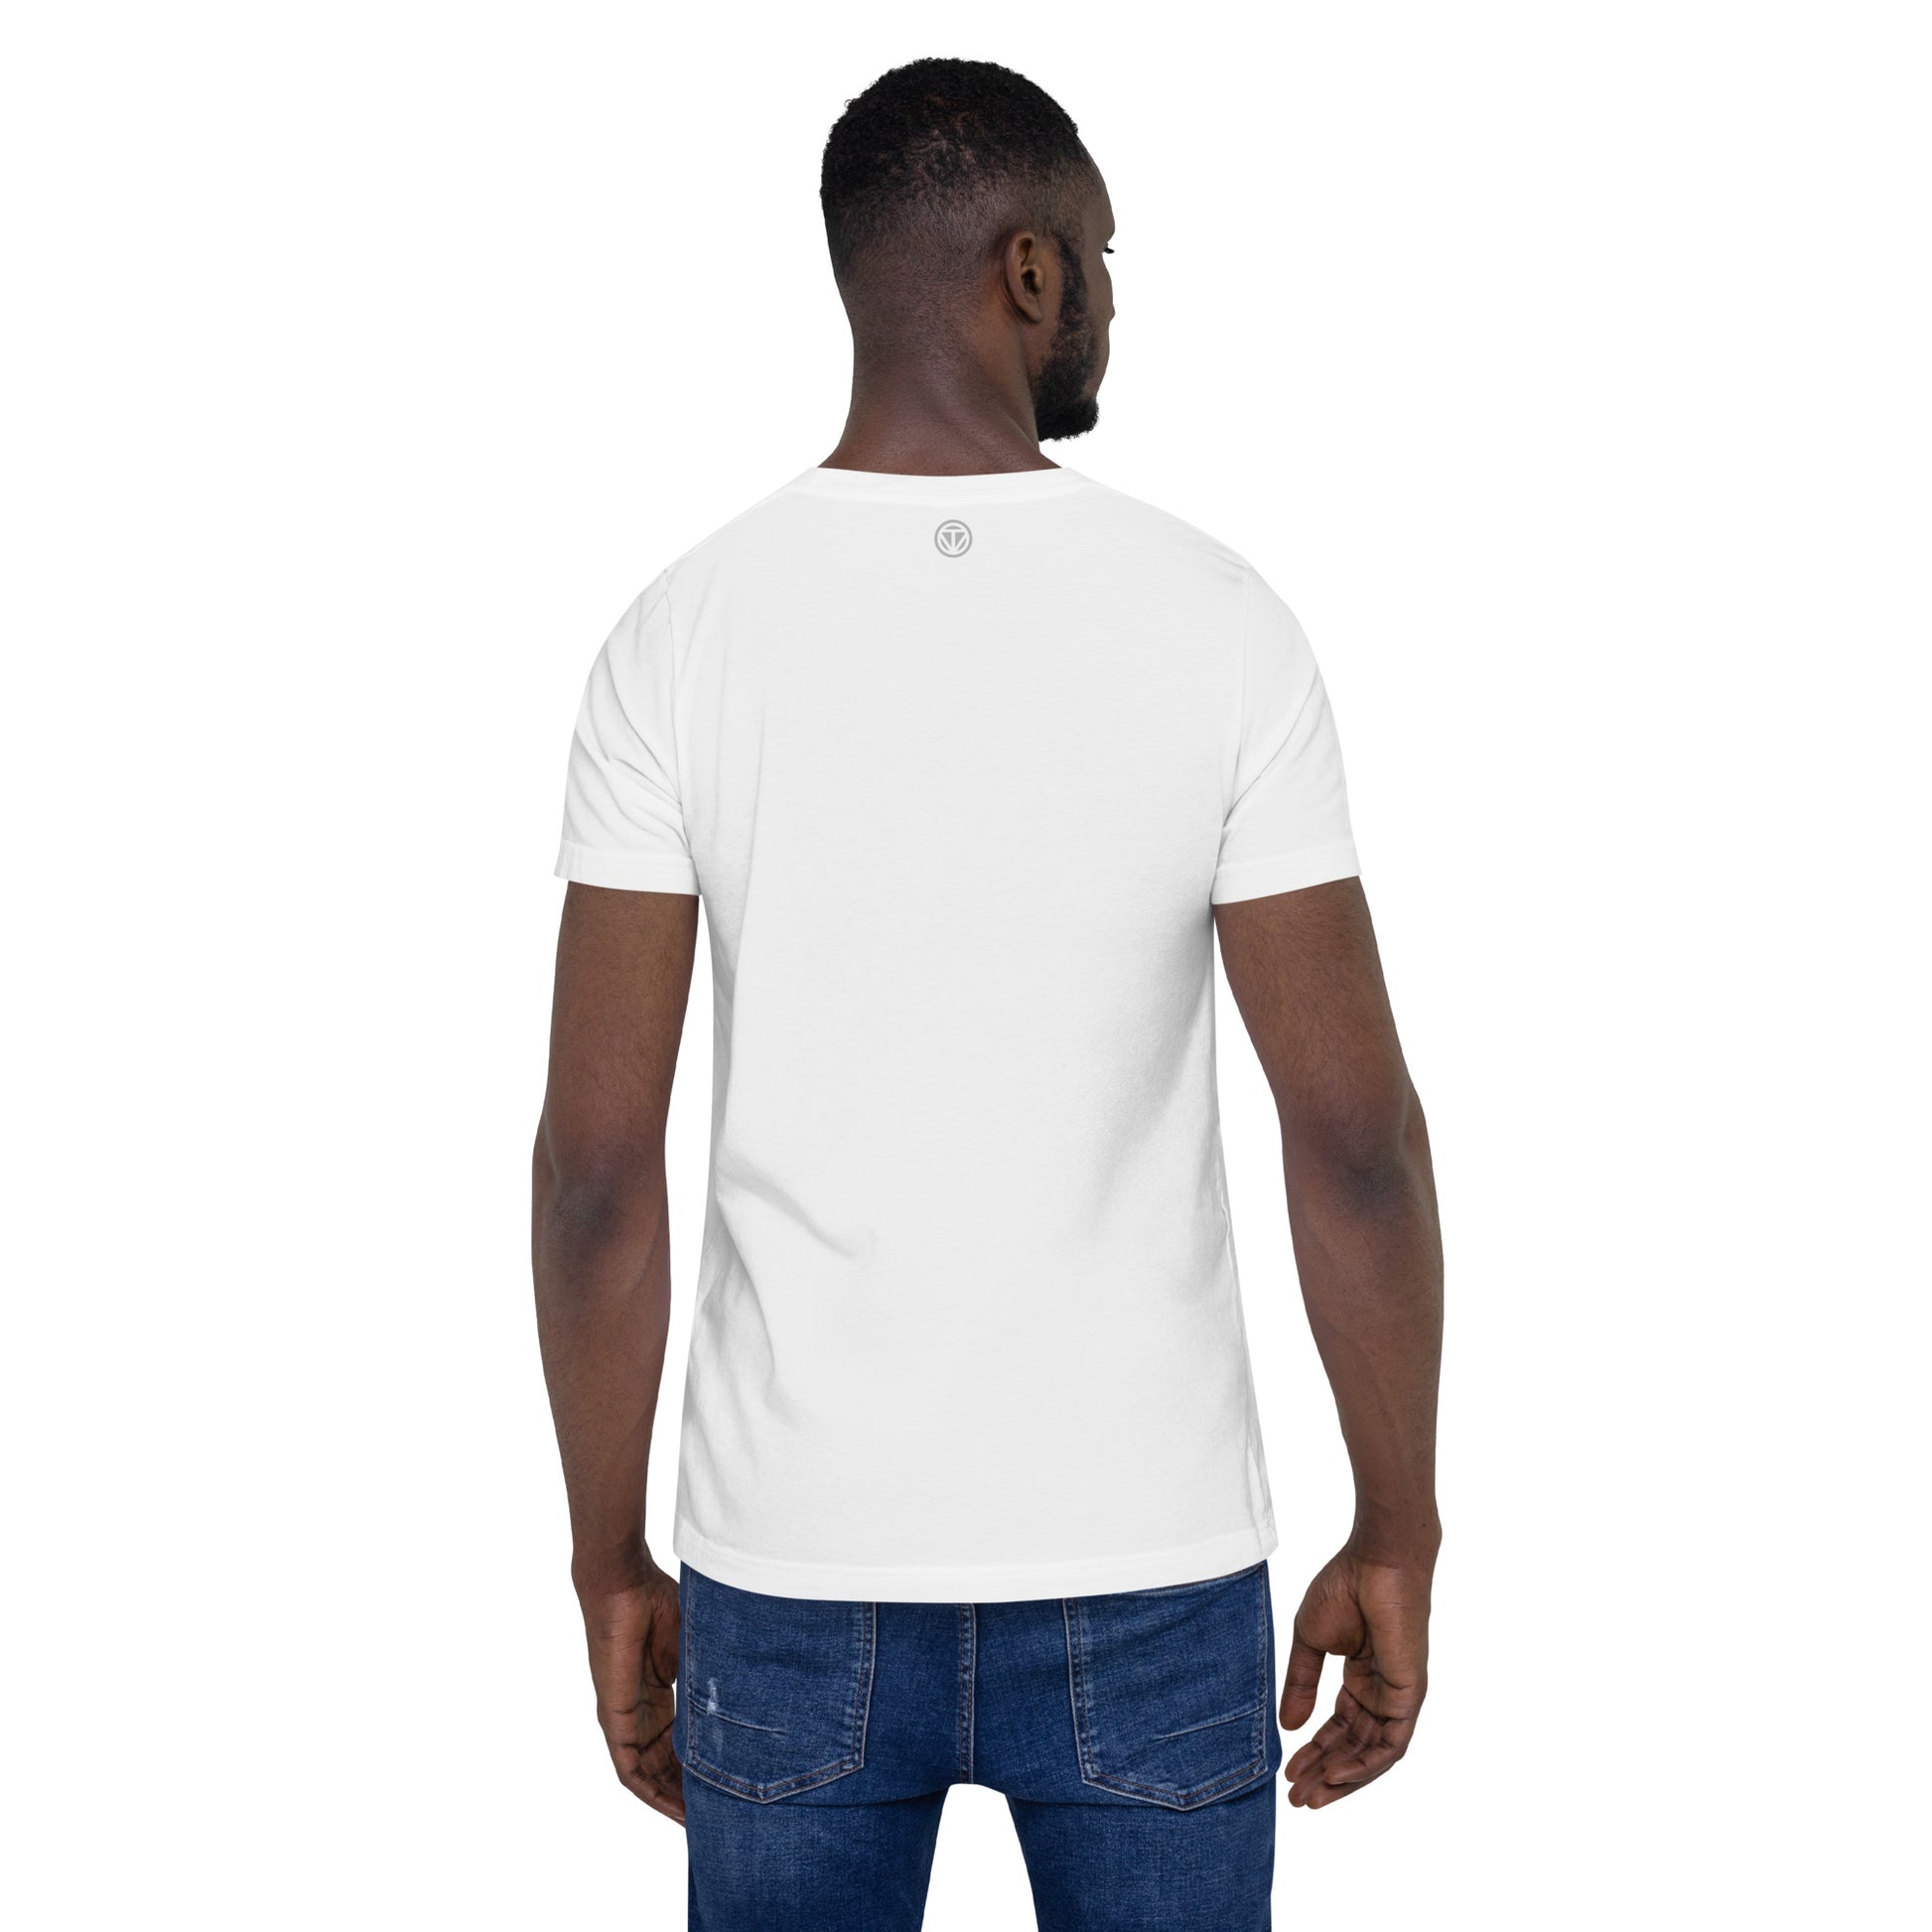 TIME OF VIBES - Men`s Cotton T-Shirt RIDE (White) - €29.00